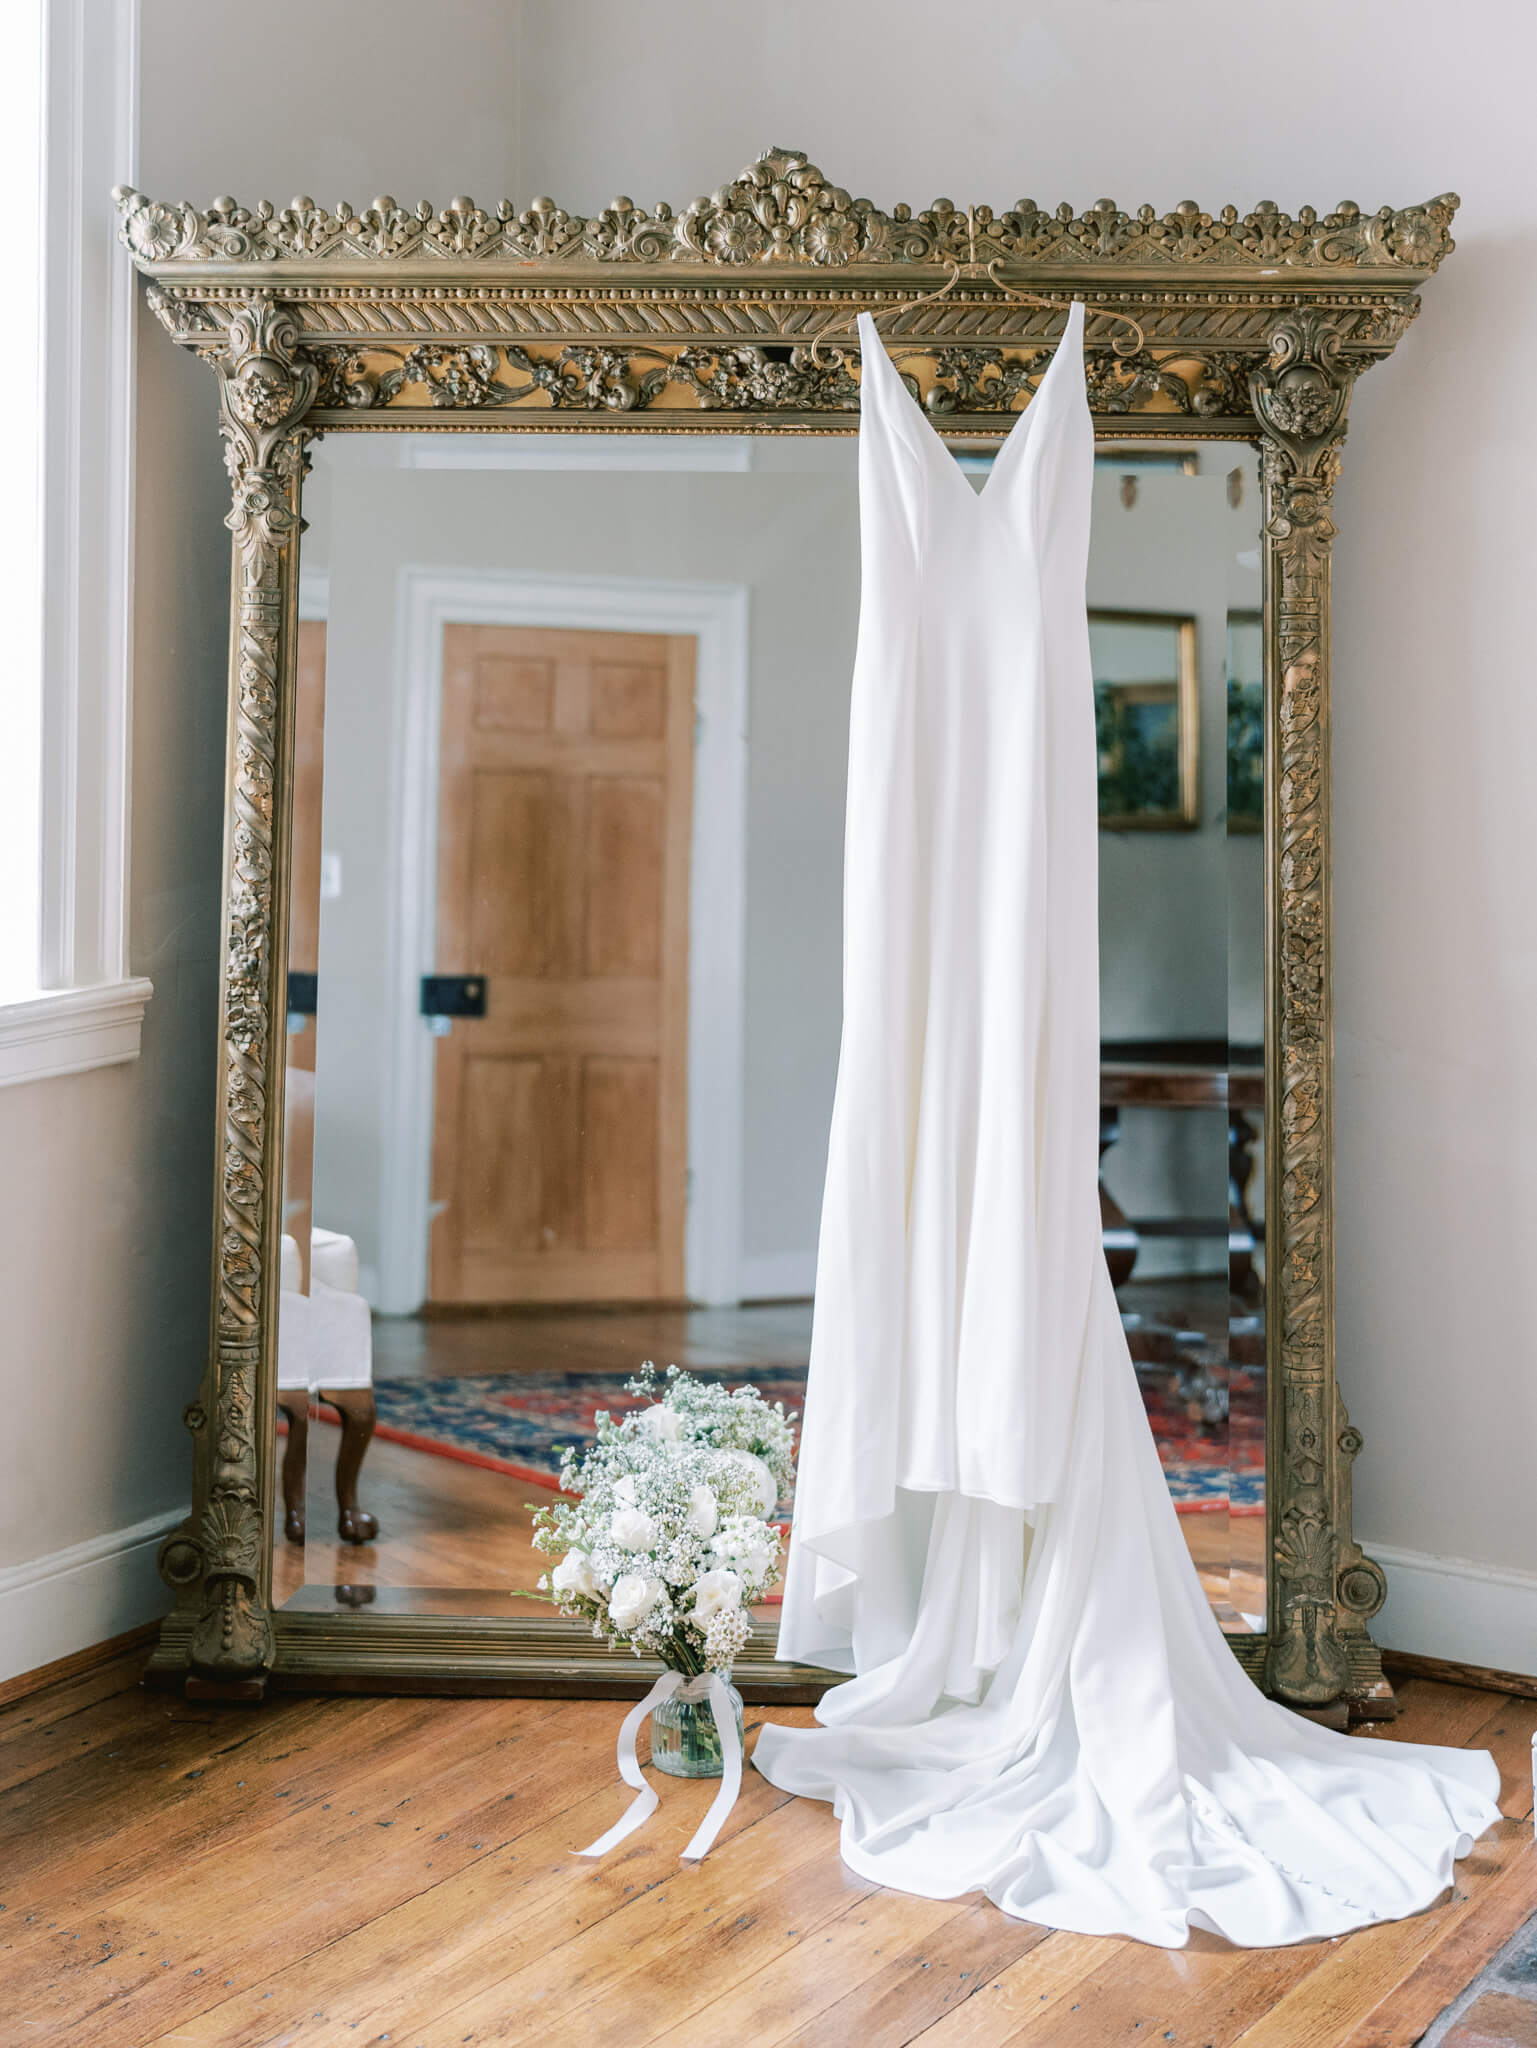 A sleek white wedding dress hanging from a large, ornate gold mirror with the bouquet and wedding shoes next to it.